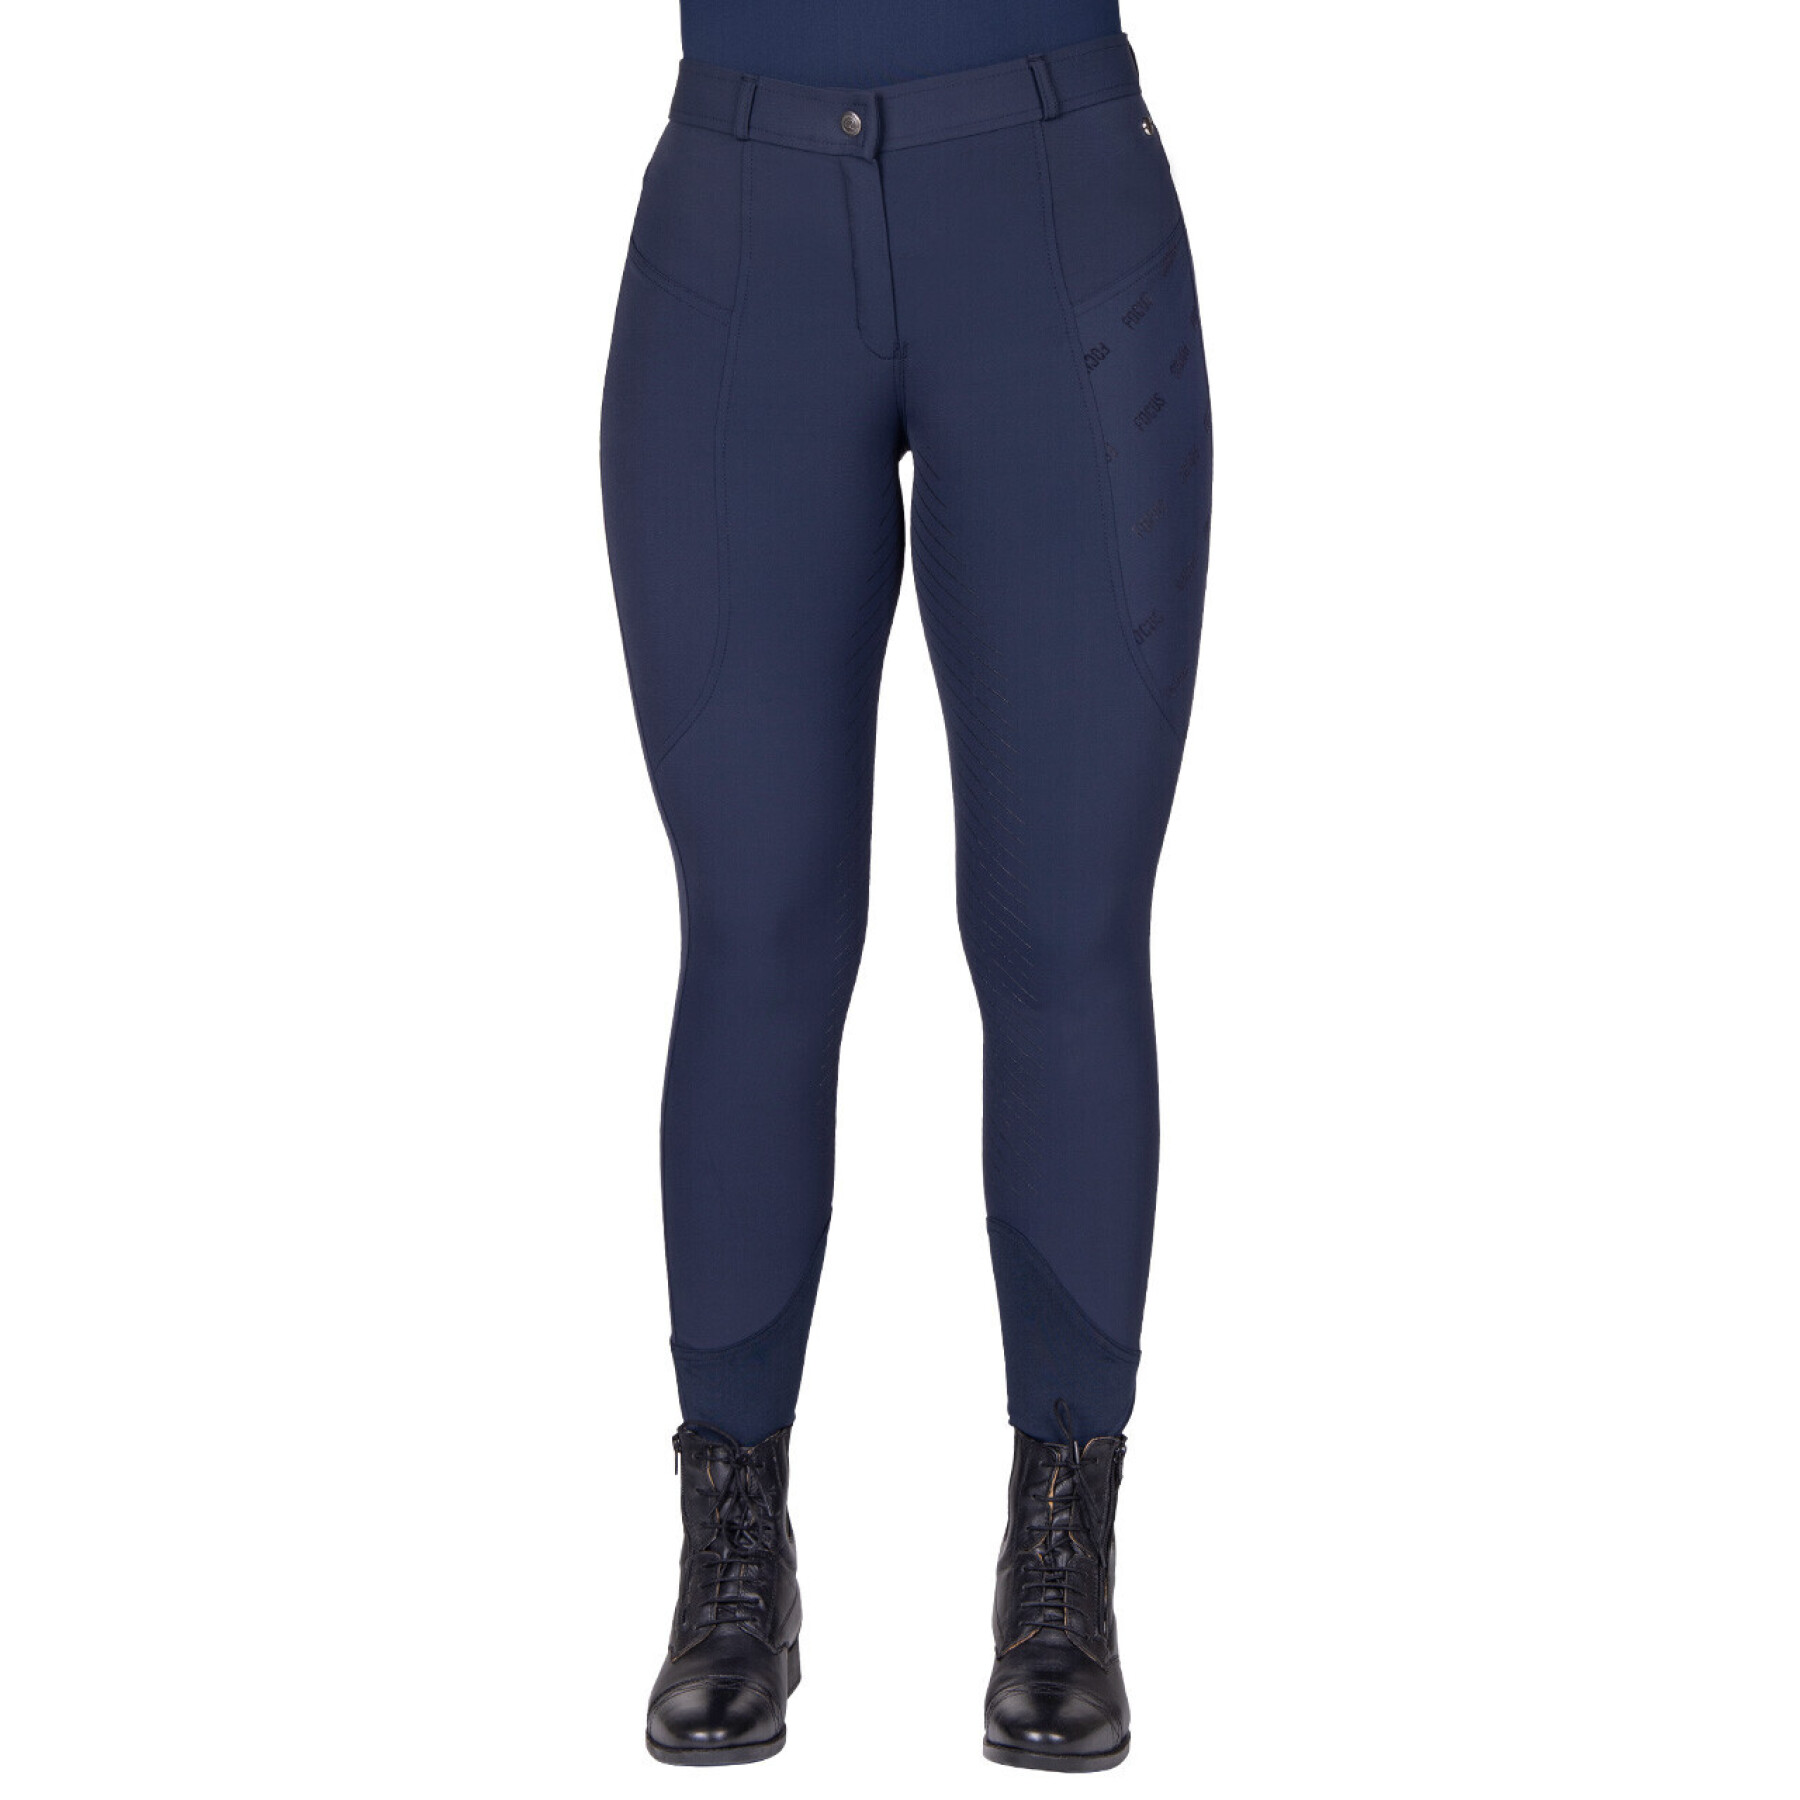 Mid grip riding pants for women QHP Summer